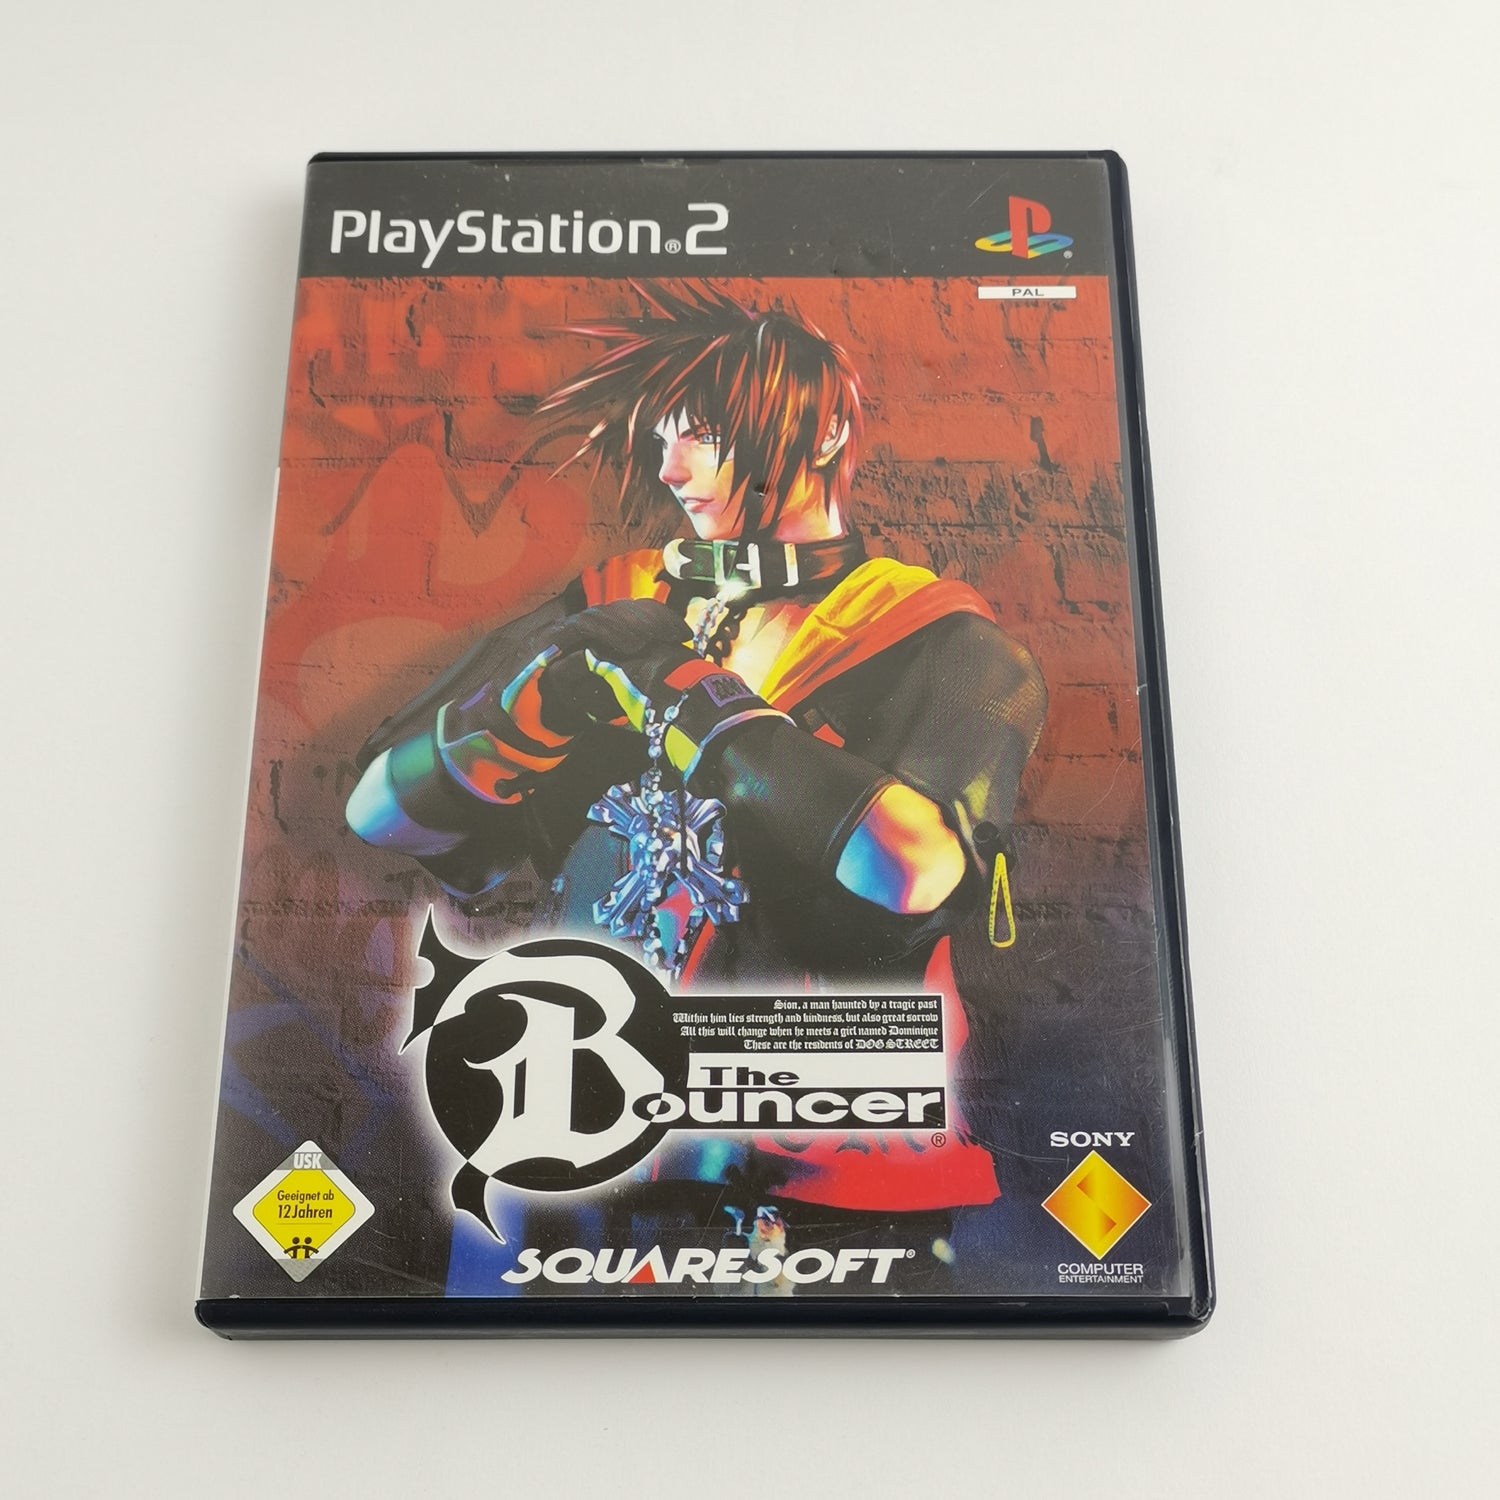 Sony Playstation 2 Game: The Bouncer + Walkthrough Book Guide | PS2 OVP PAL